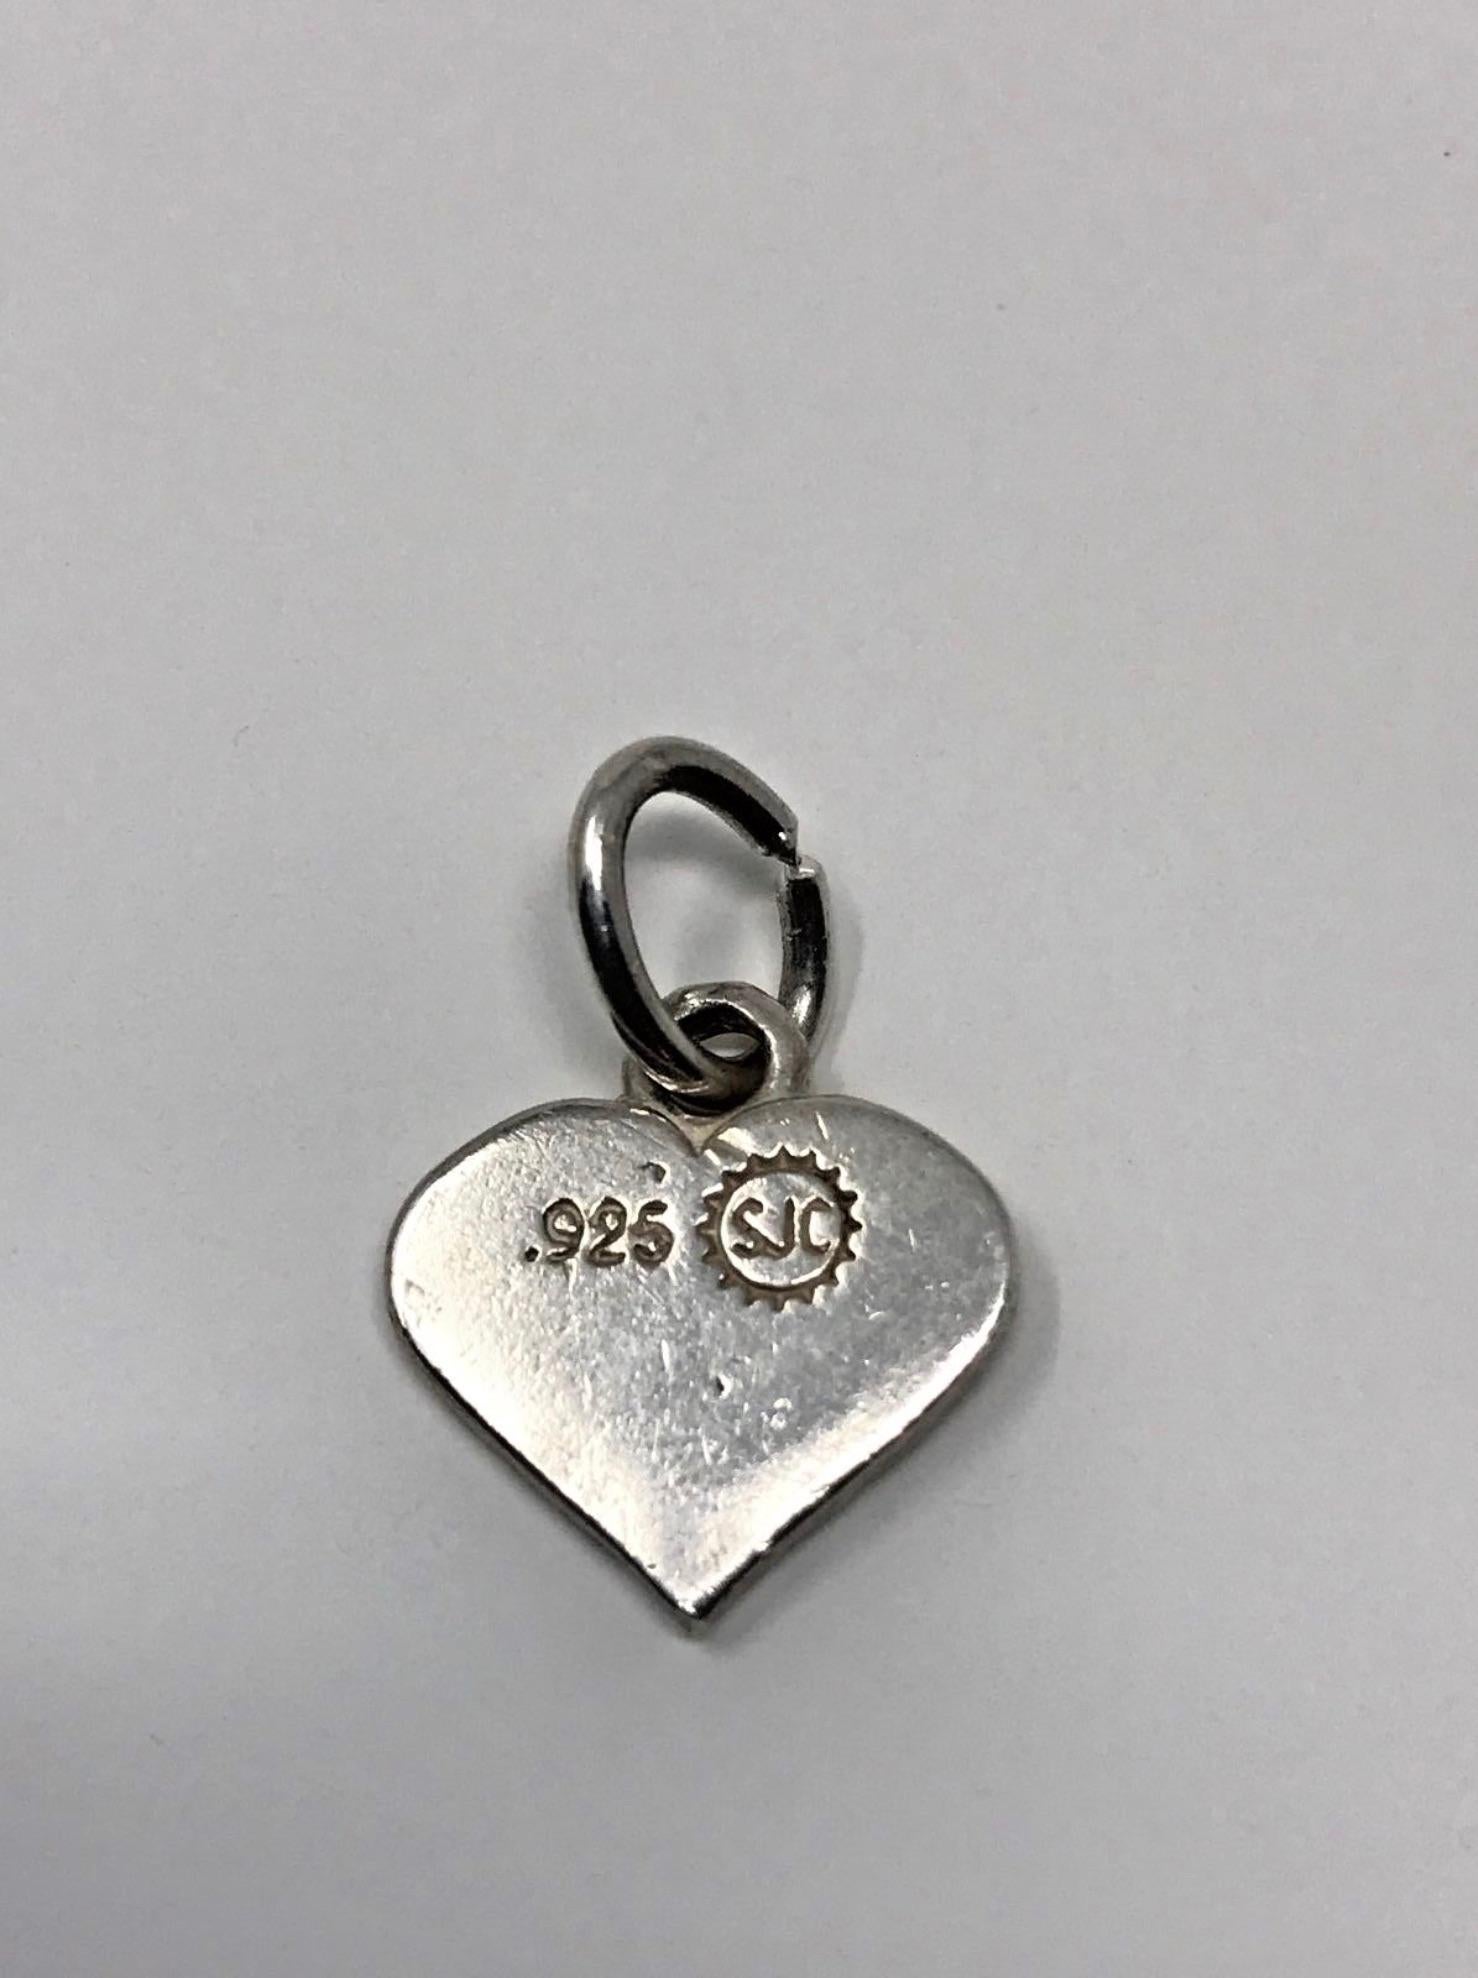 Model - Vintage Sterling Silver Flag Heart

Condition - Exceptional

SKU - 1044-20

Original Retail - $99.00

Dimensions - .7 x .6 x .1

Closure Type - Not Applicable

Material - Sterling Silver

Comes with - No Additional Accessories